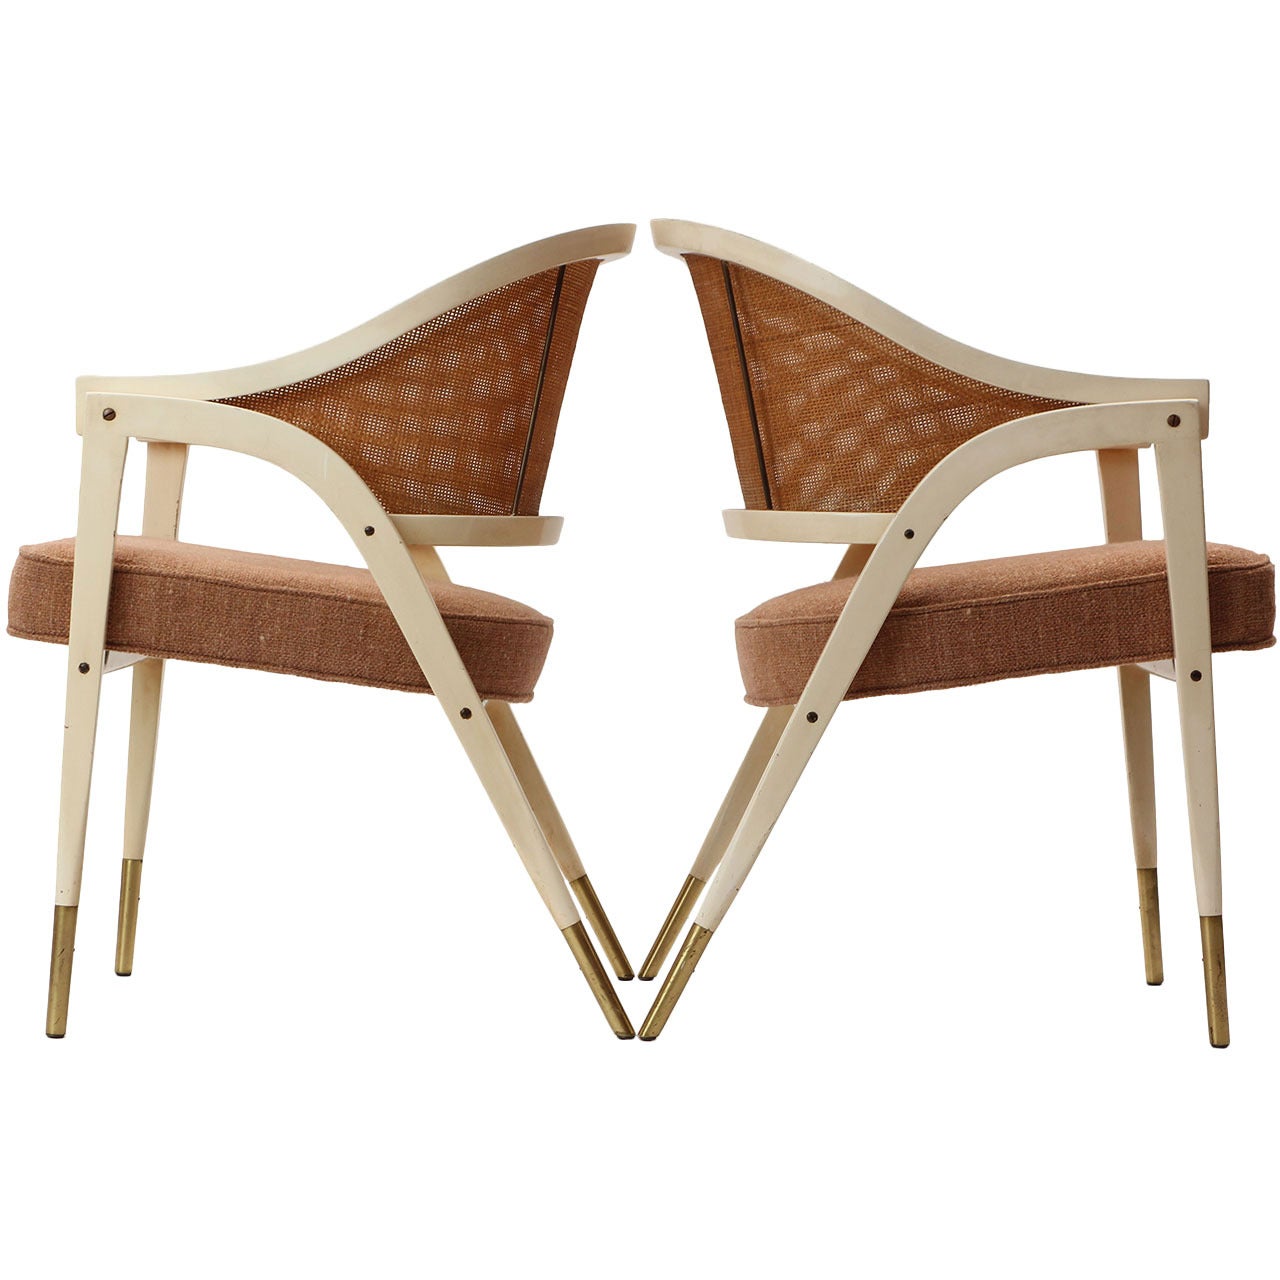 "A-Frame" Chairs By Edward Wormley